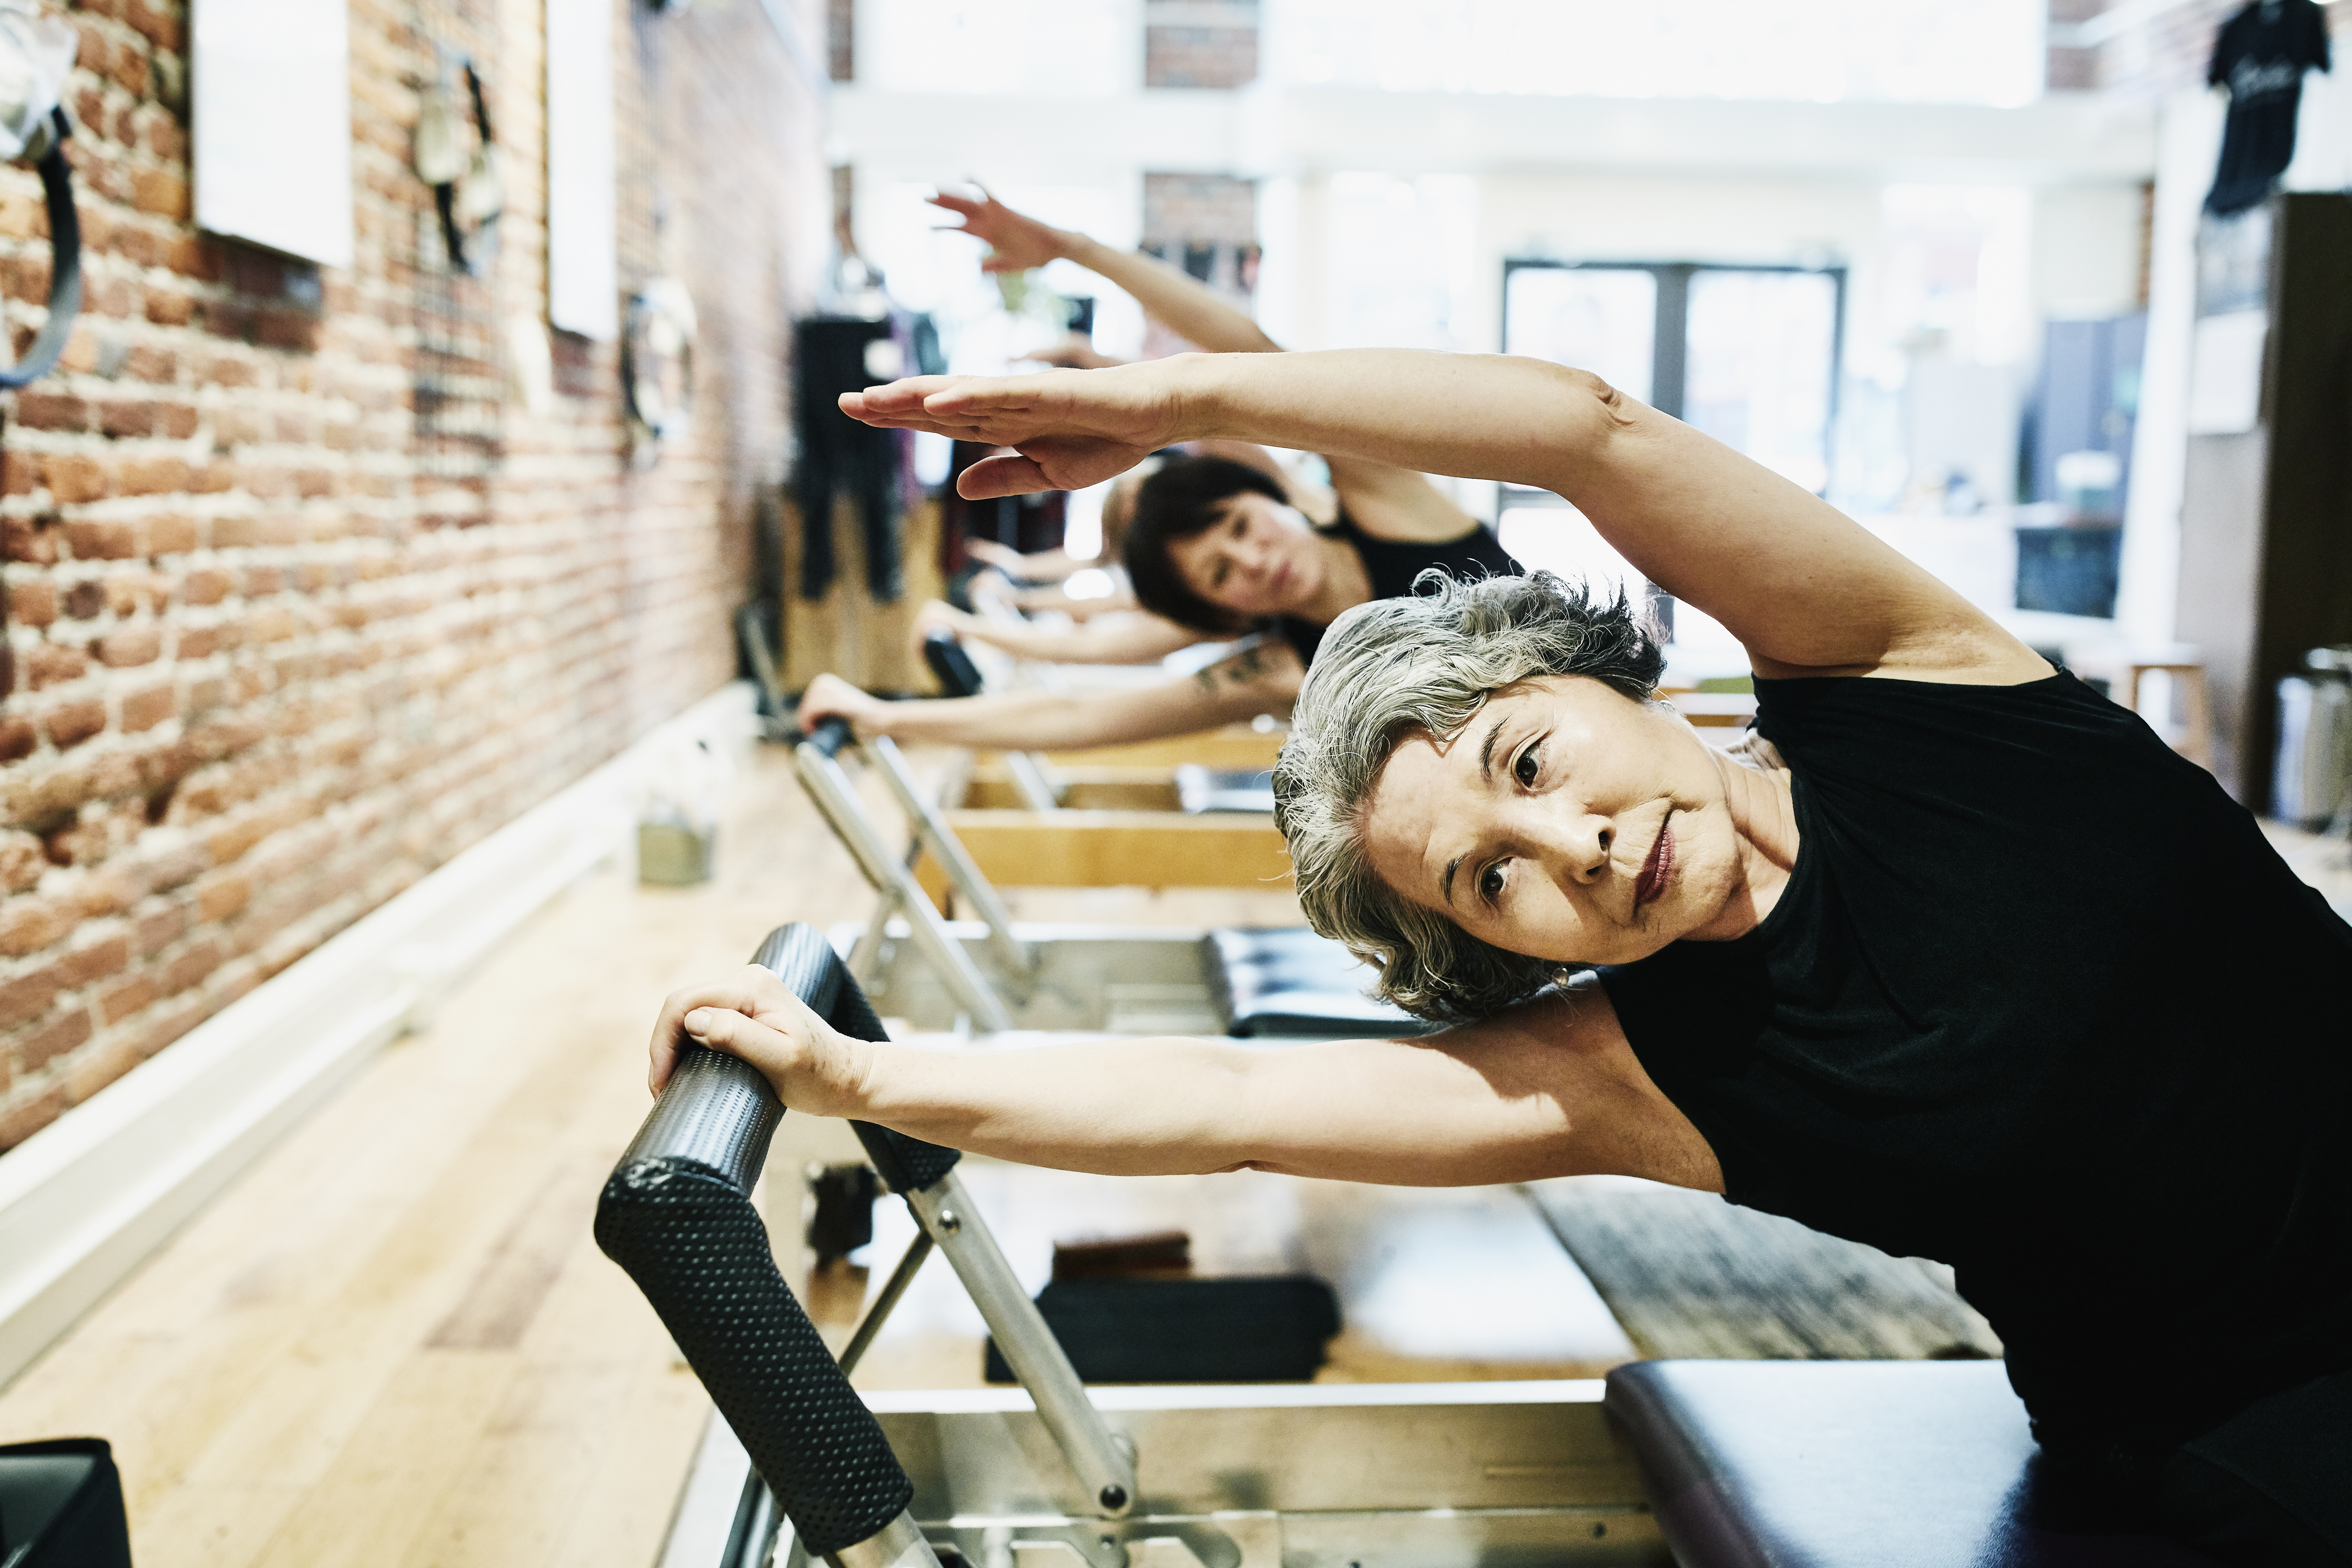 7 Pilates Mistakes Newbies Make and How to Avoid Them